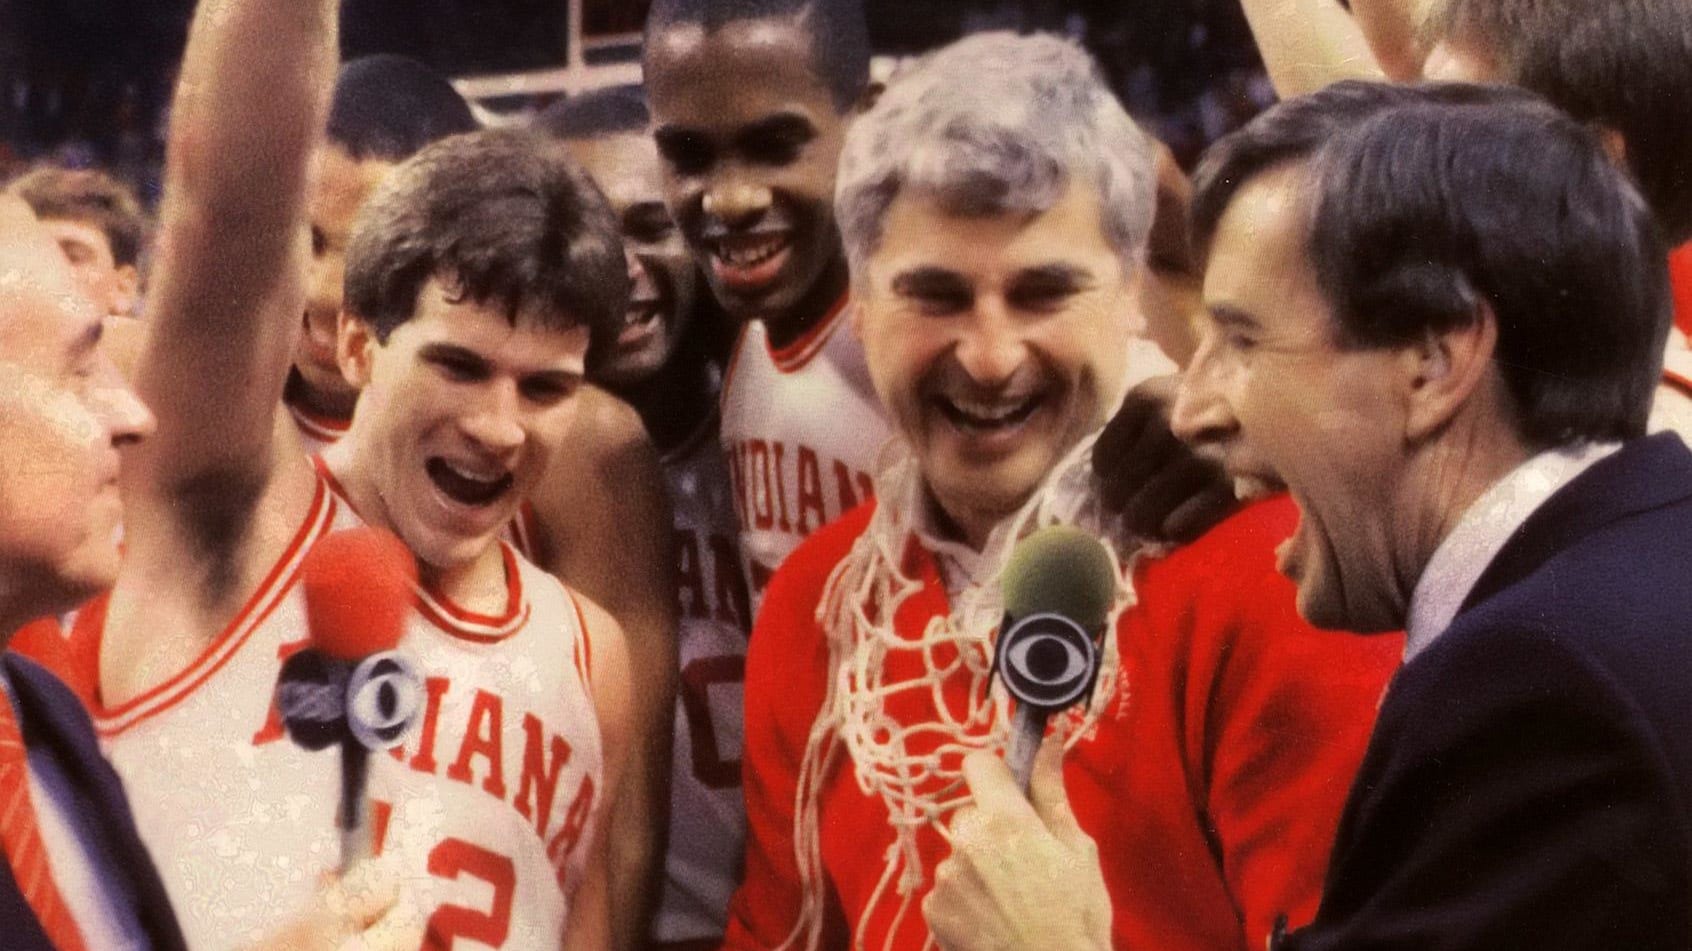 Indiana coach Bob Knight celebrates the Hoosiers' 1987 NCAA championship with Steve Alford.